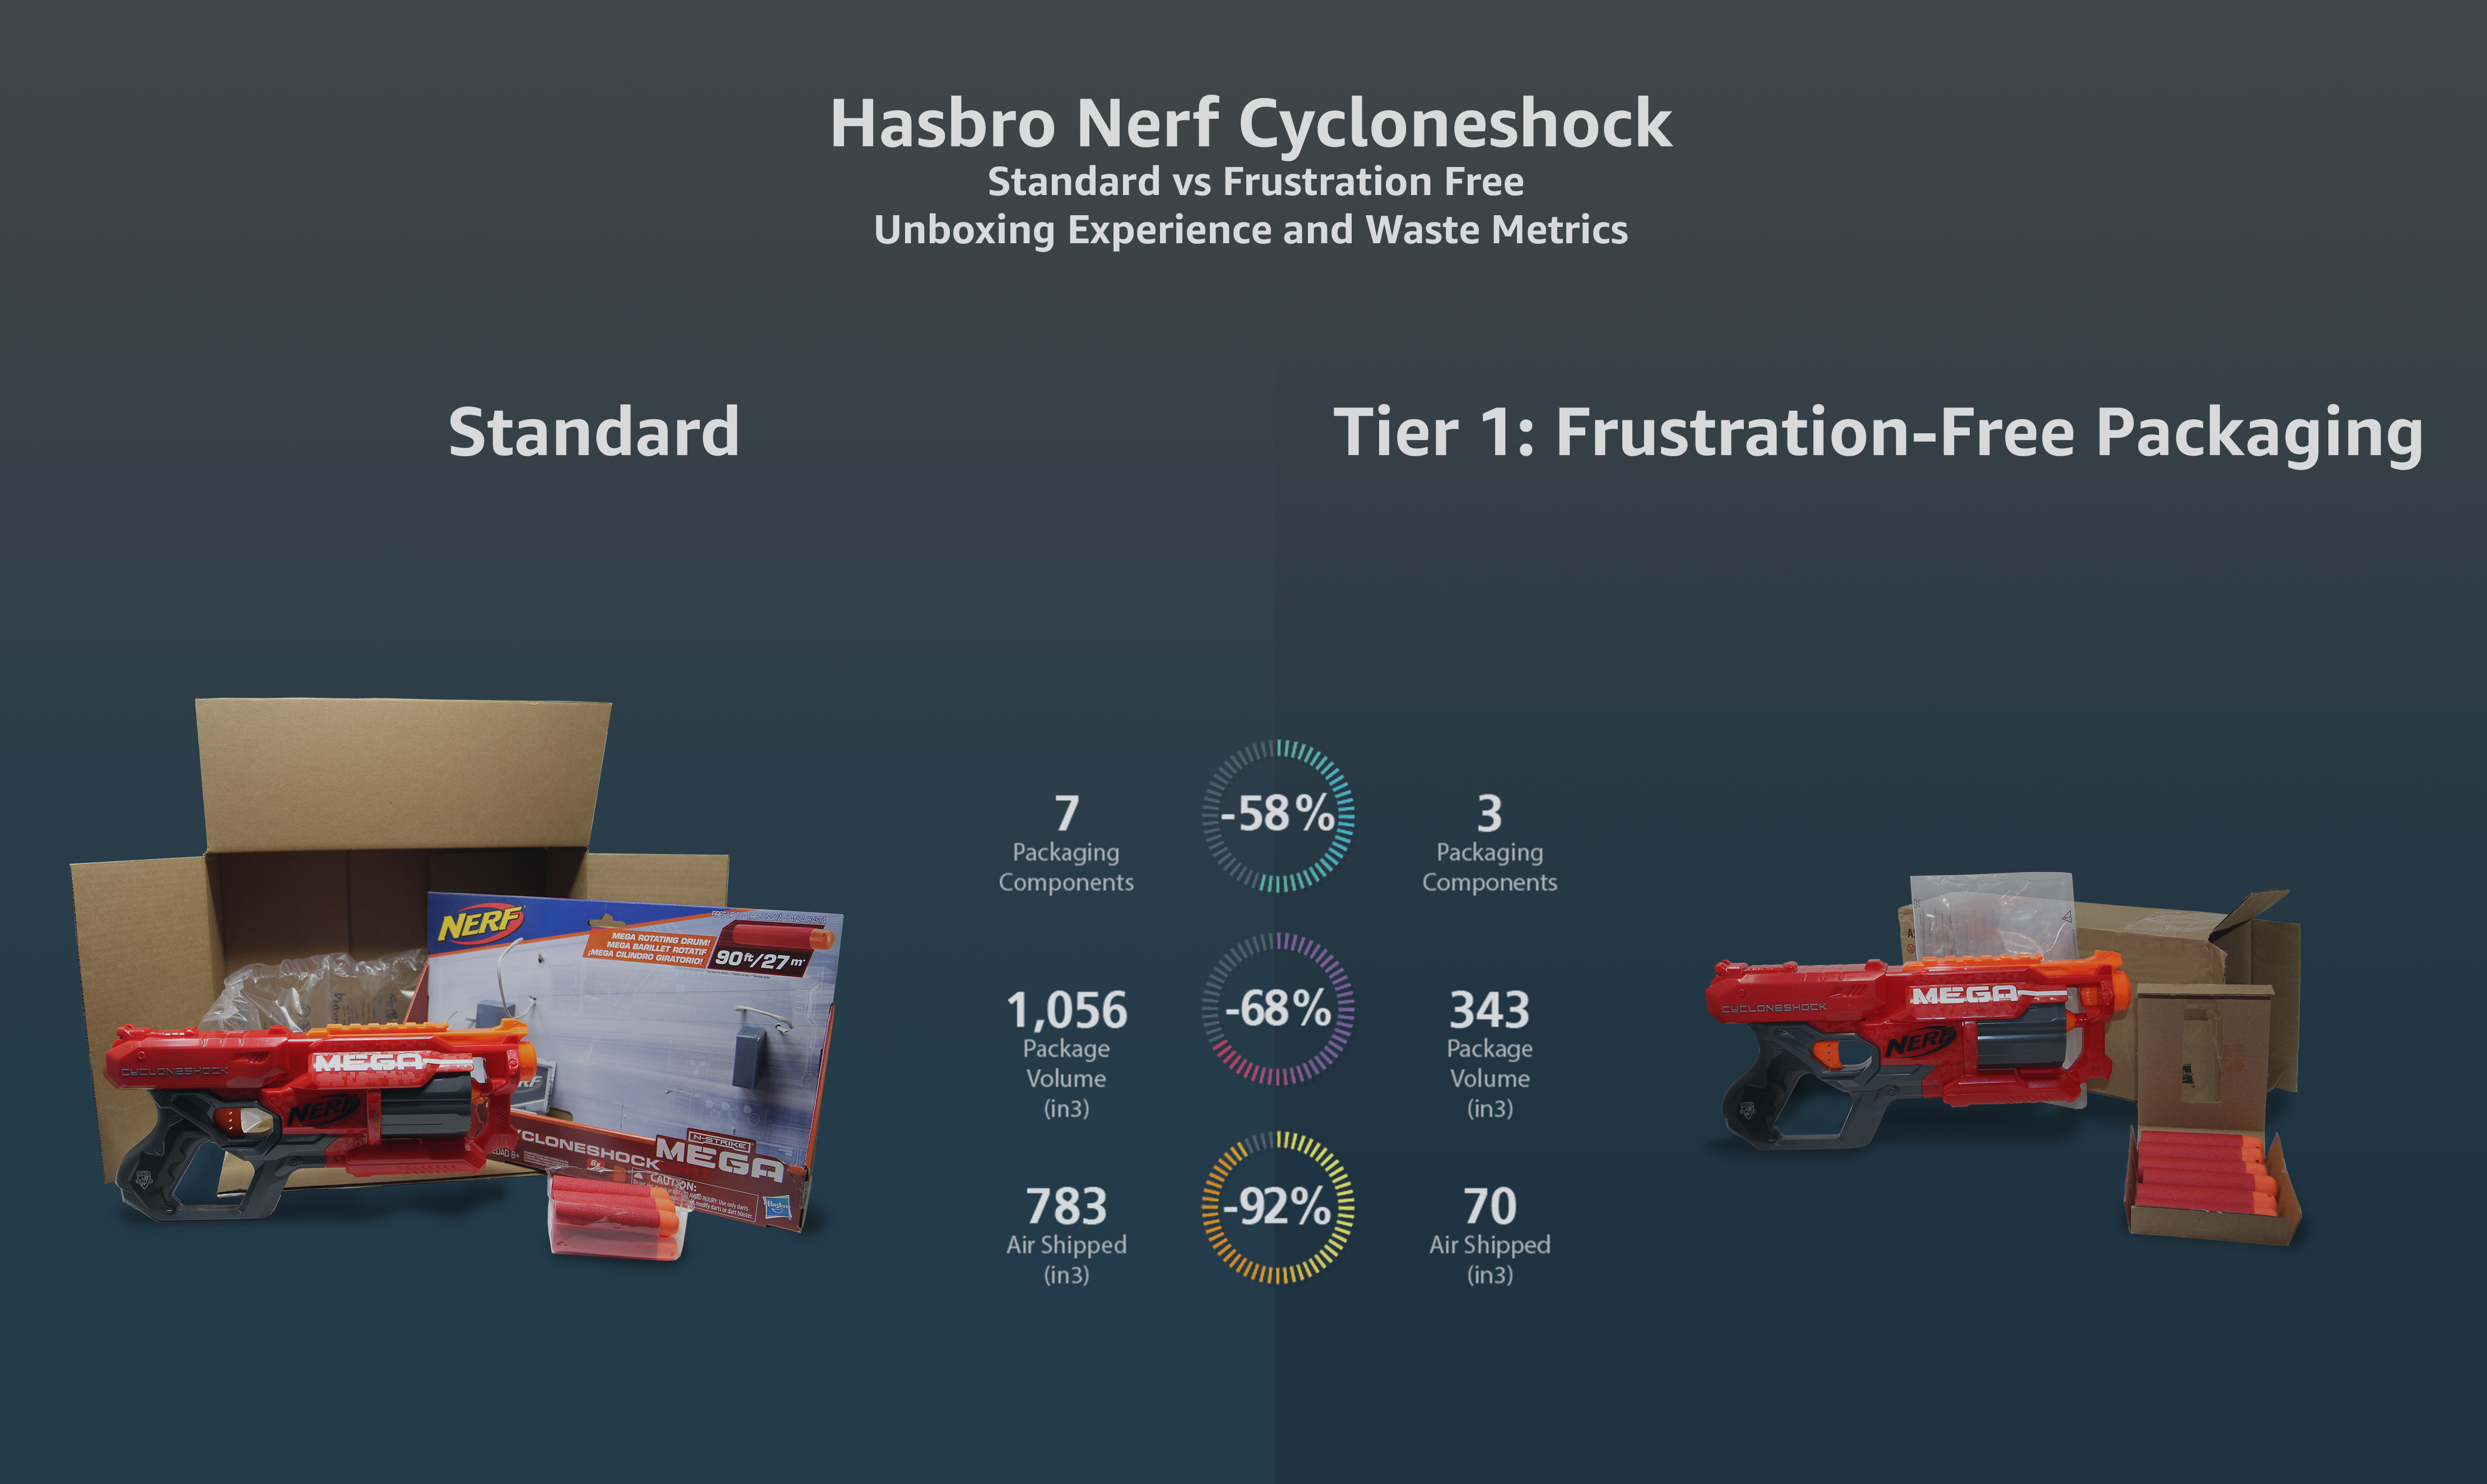 Hasbro packaging case study from Amazon